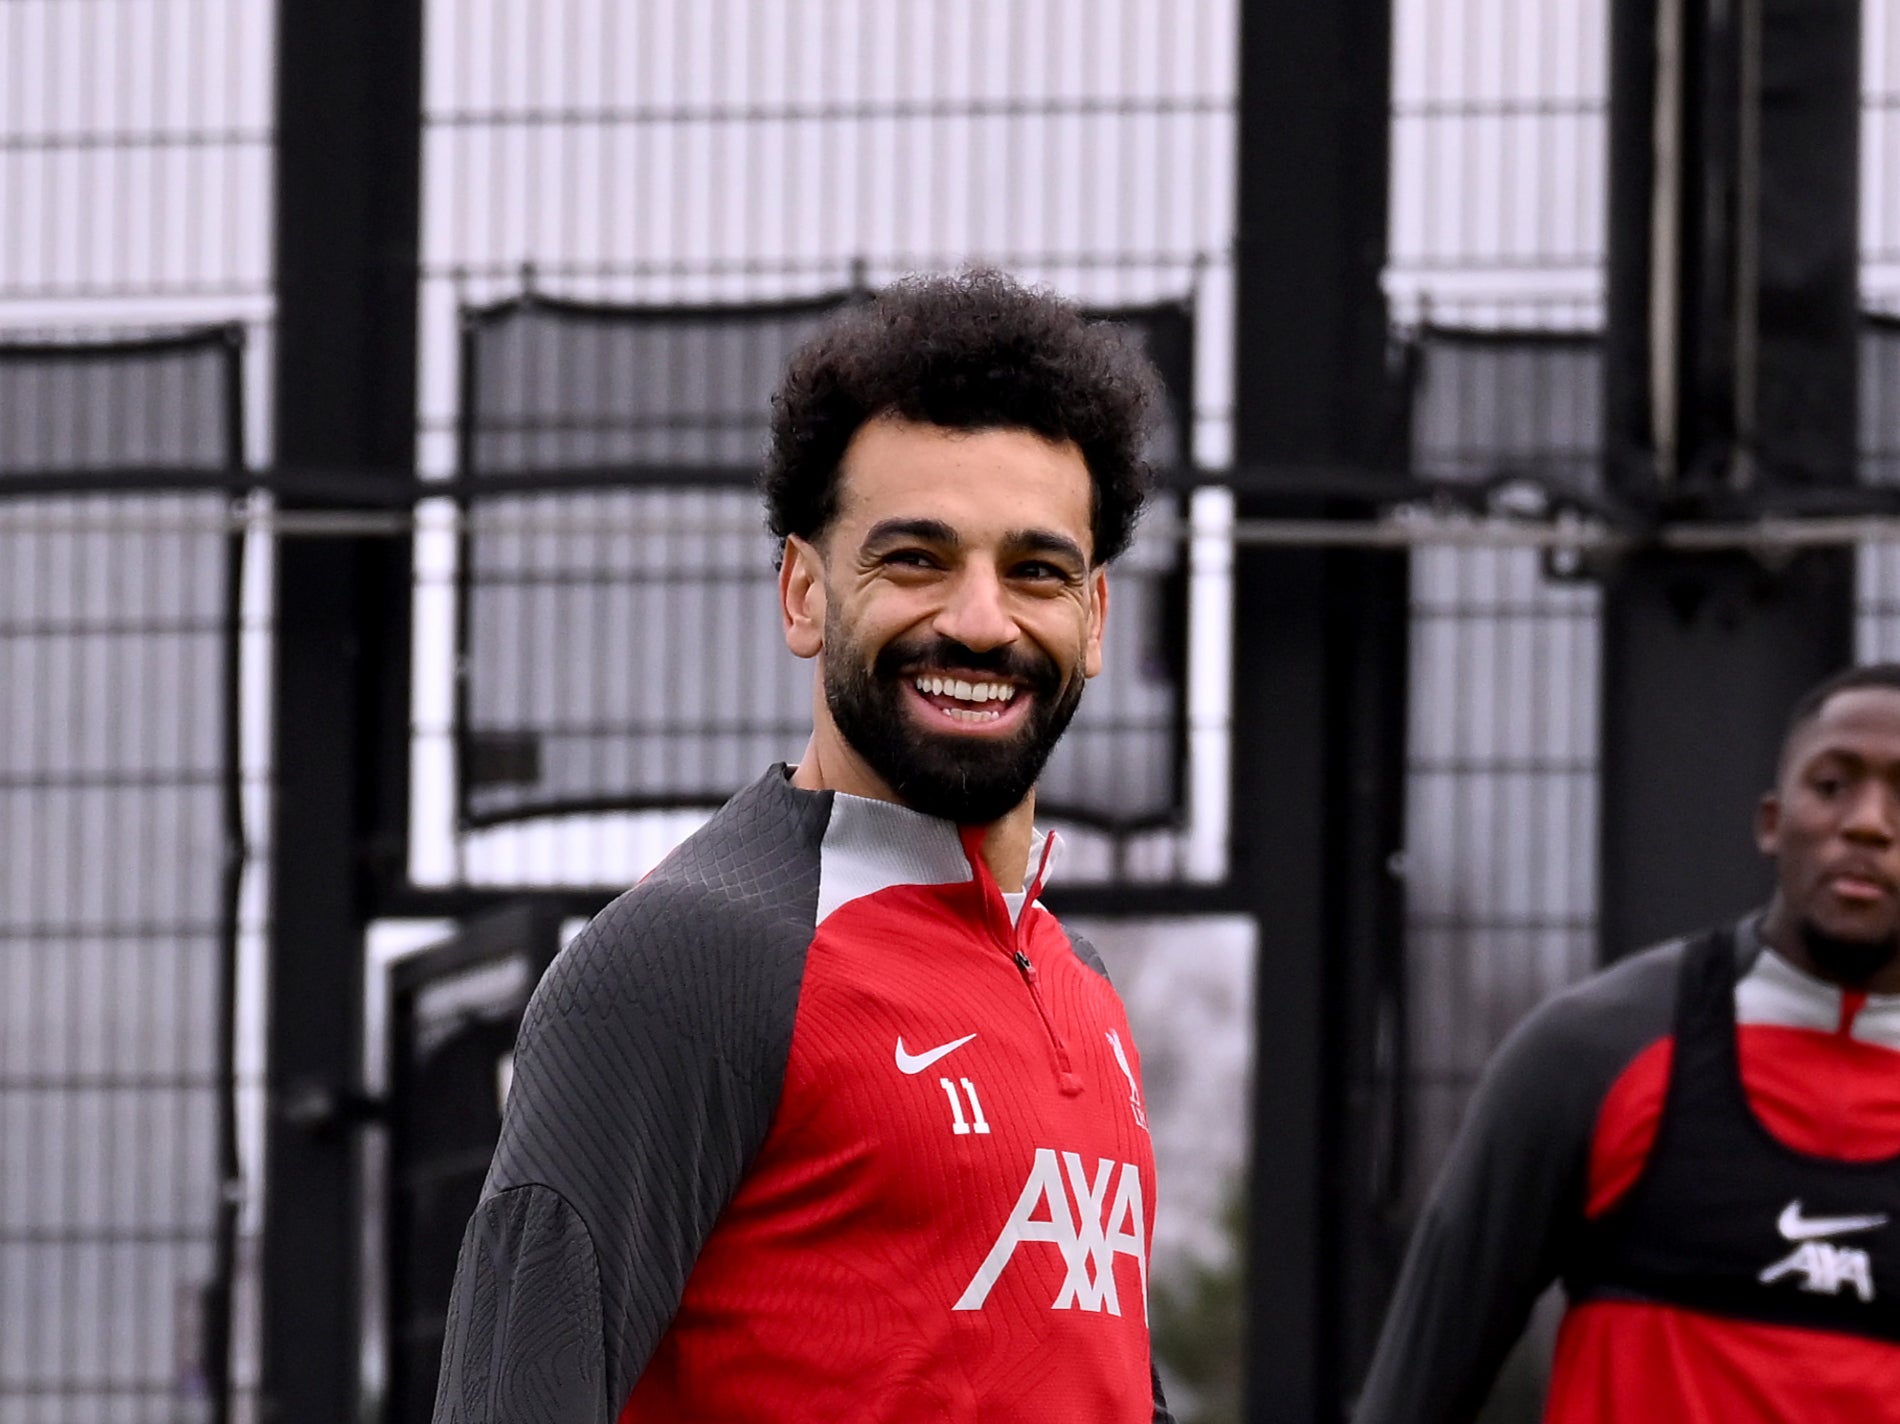 Mohamed Salah returned to Liverpool training this week